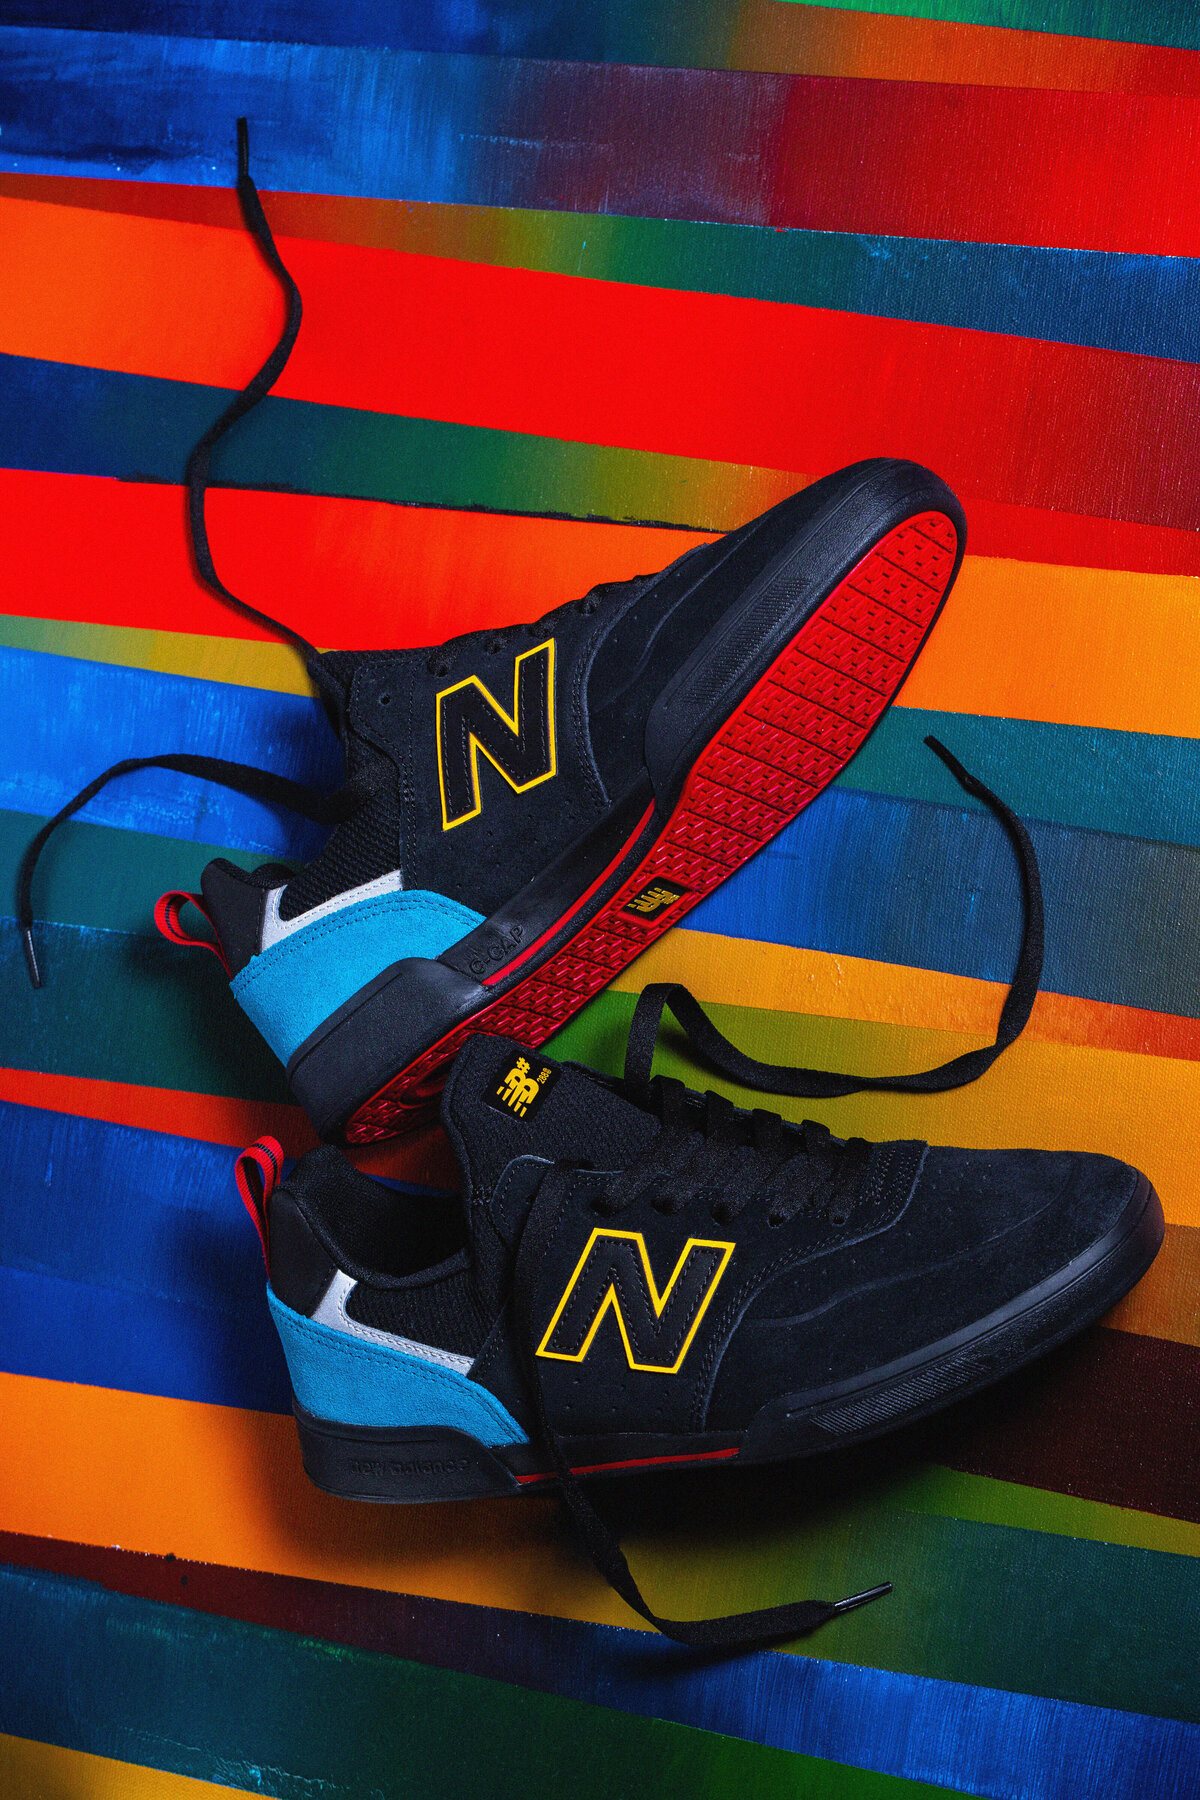 New Balance shoes captured for Bluetile Skate shop in Columbia, SC